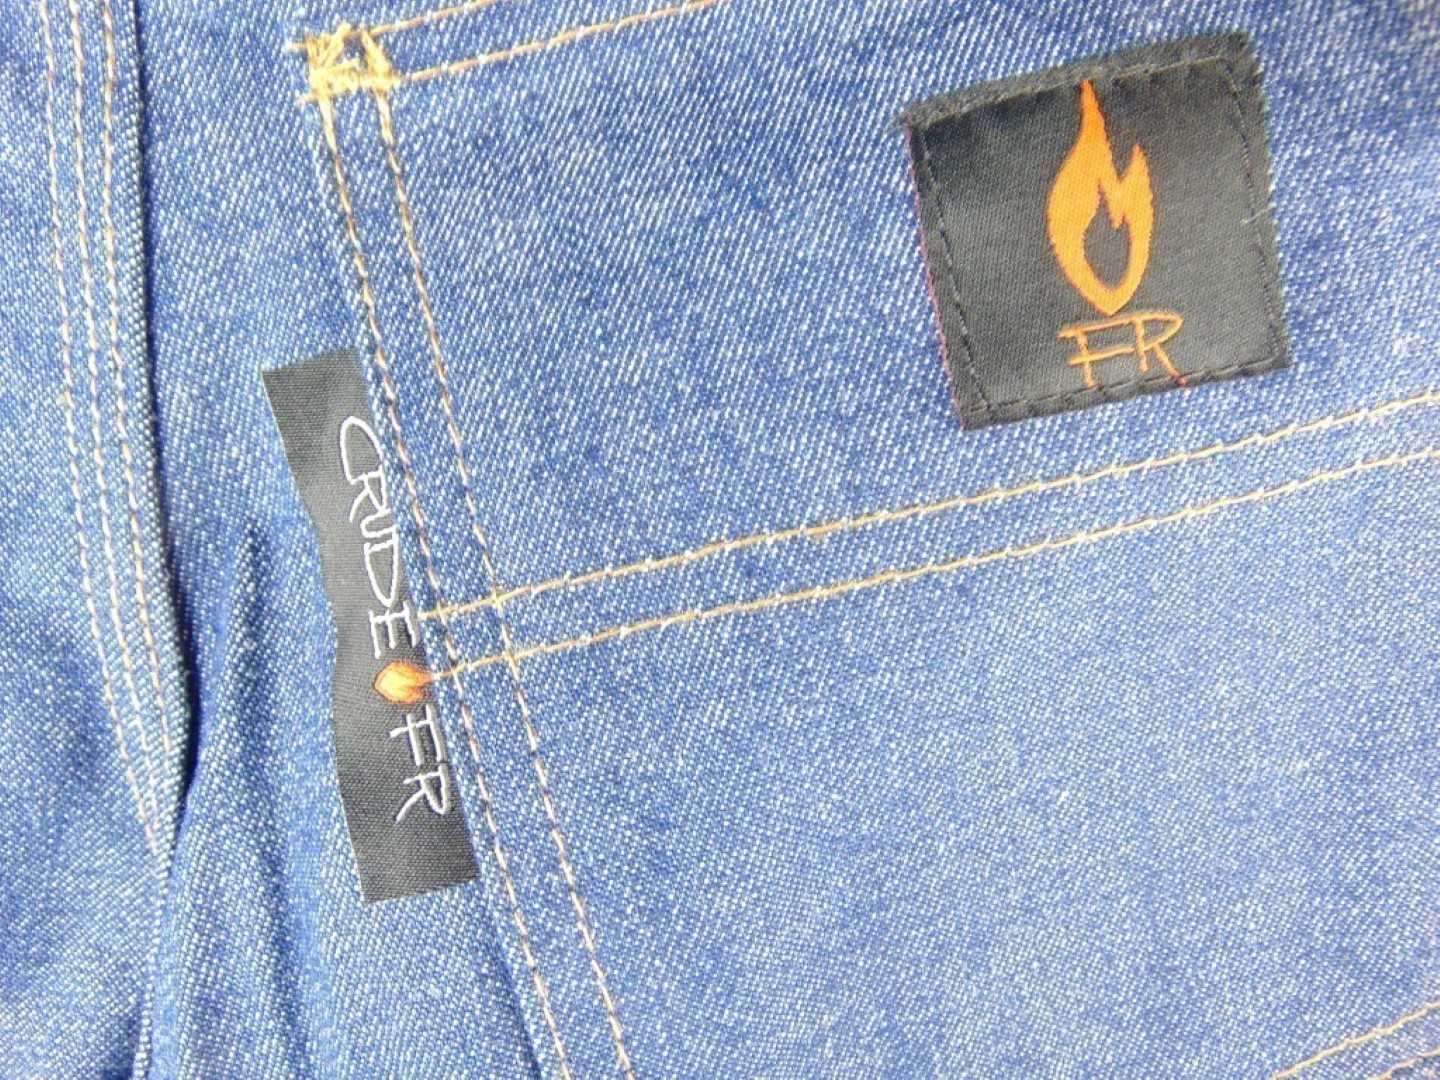 58x38U CRUDE FR / Flame Resistant Jeans (Unfinished Seam)